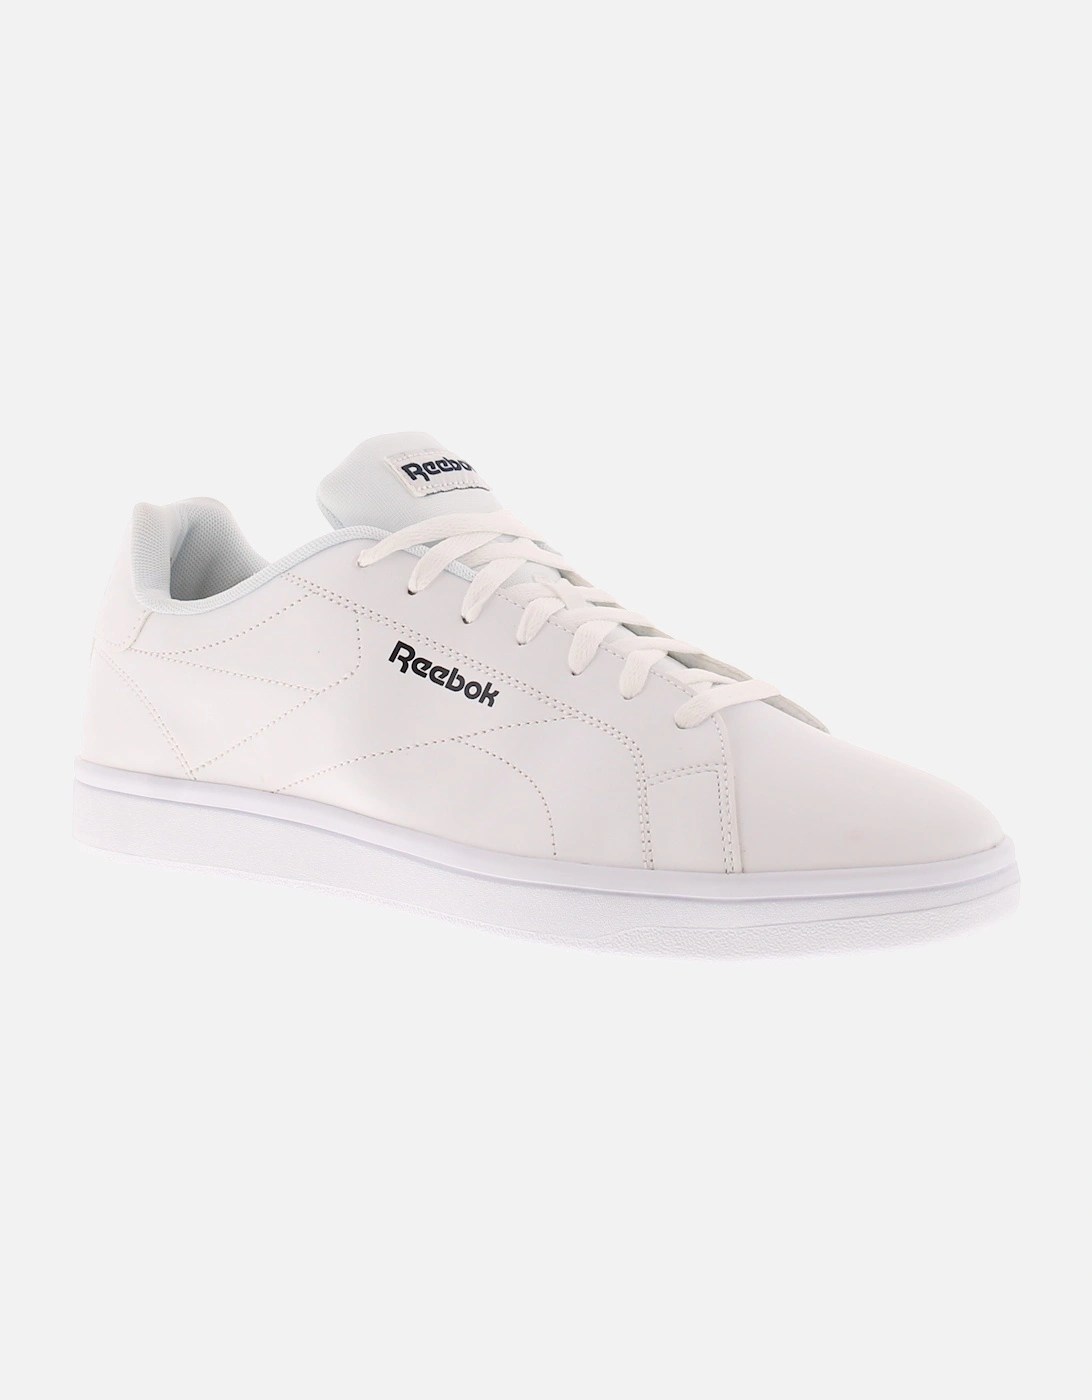 Mens Skate Shoes Royal Complete Leather Lace Up white UK Size, 6 of 5